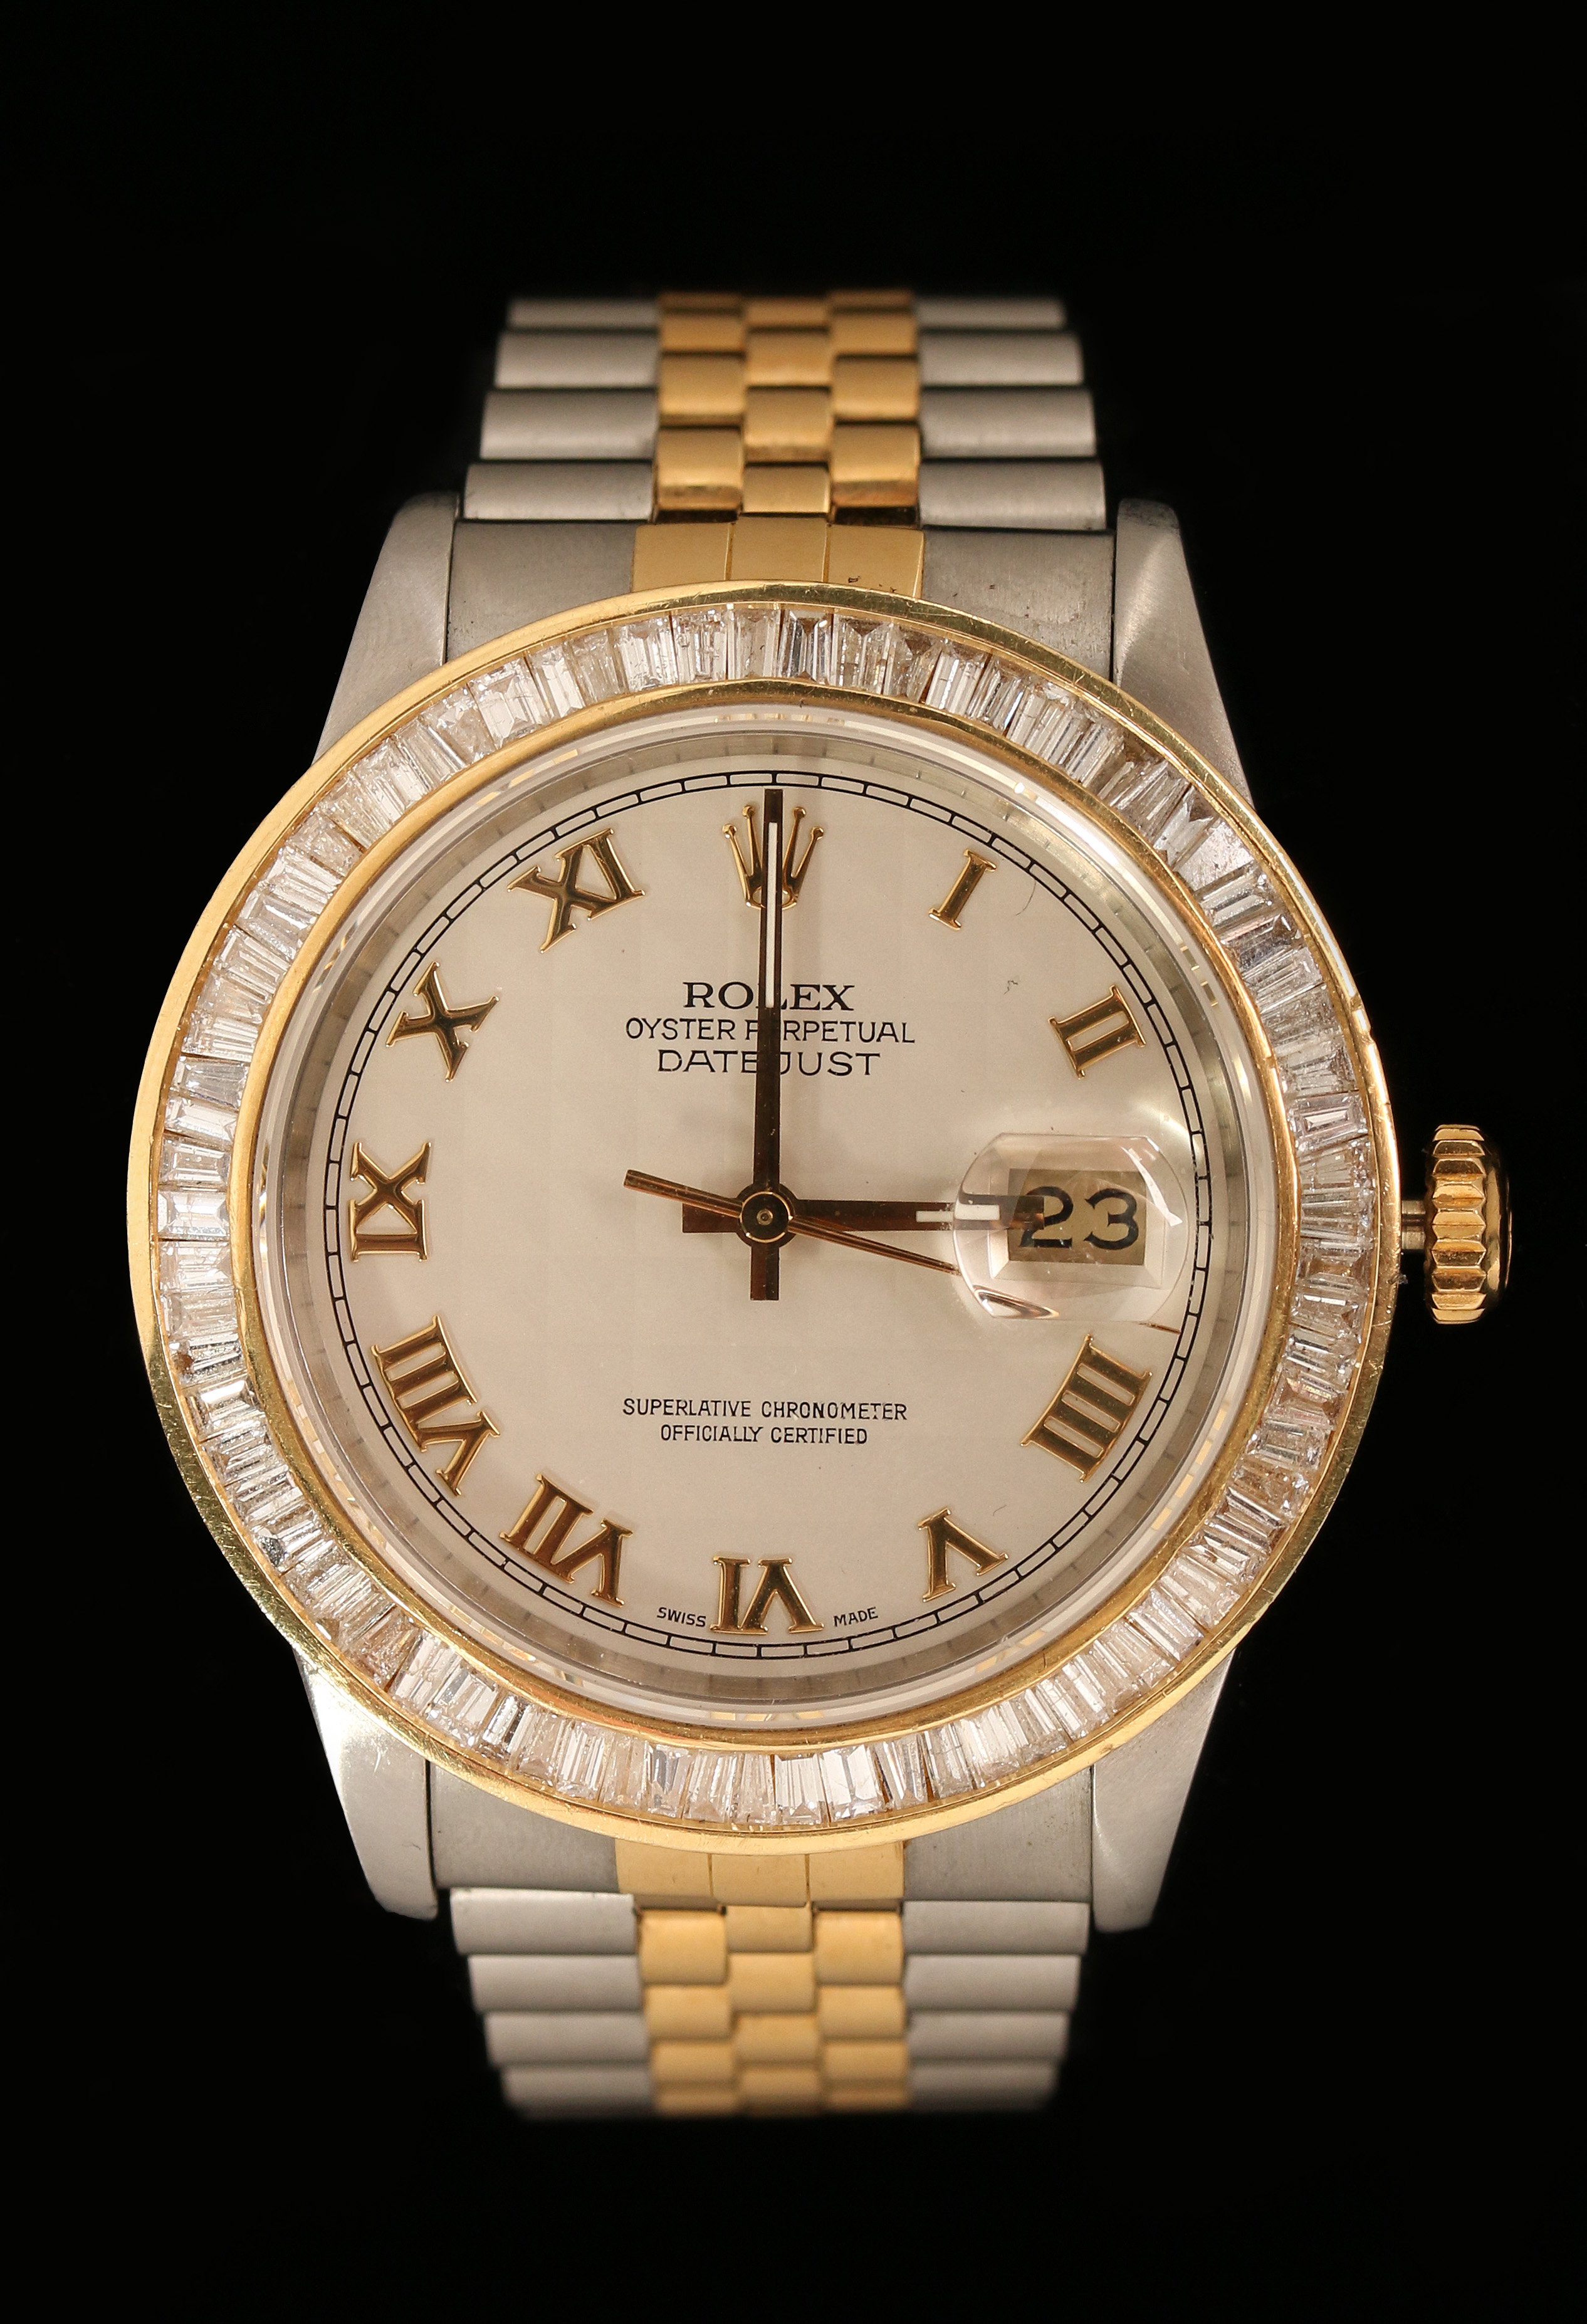 A ROLEX OYSTER PERPETUAL WRIST WATCH WITH DIAMONDS